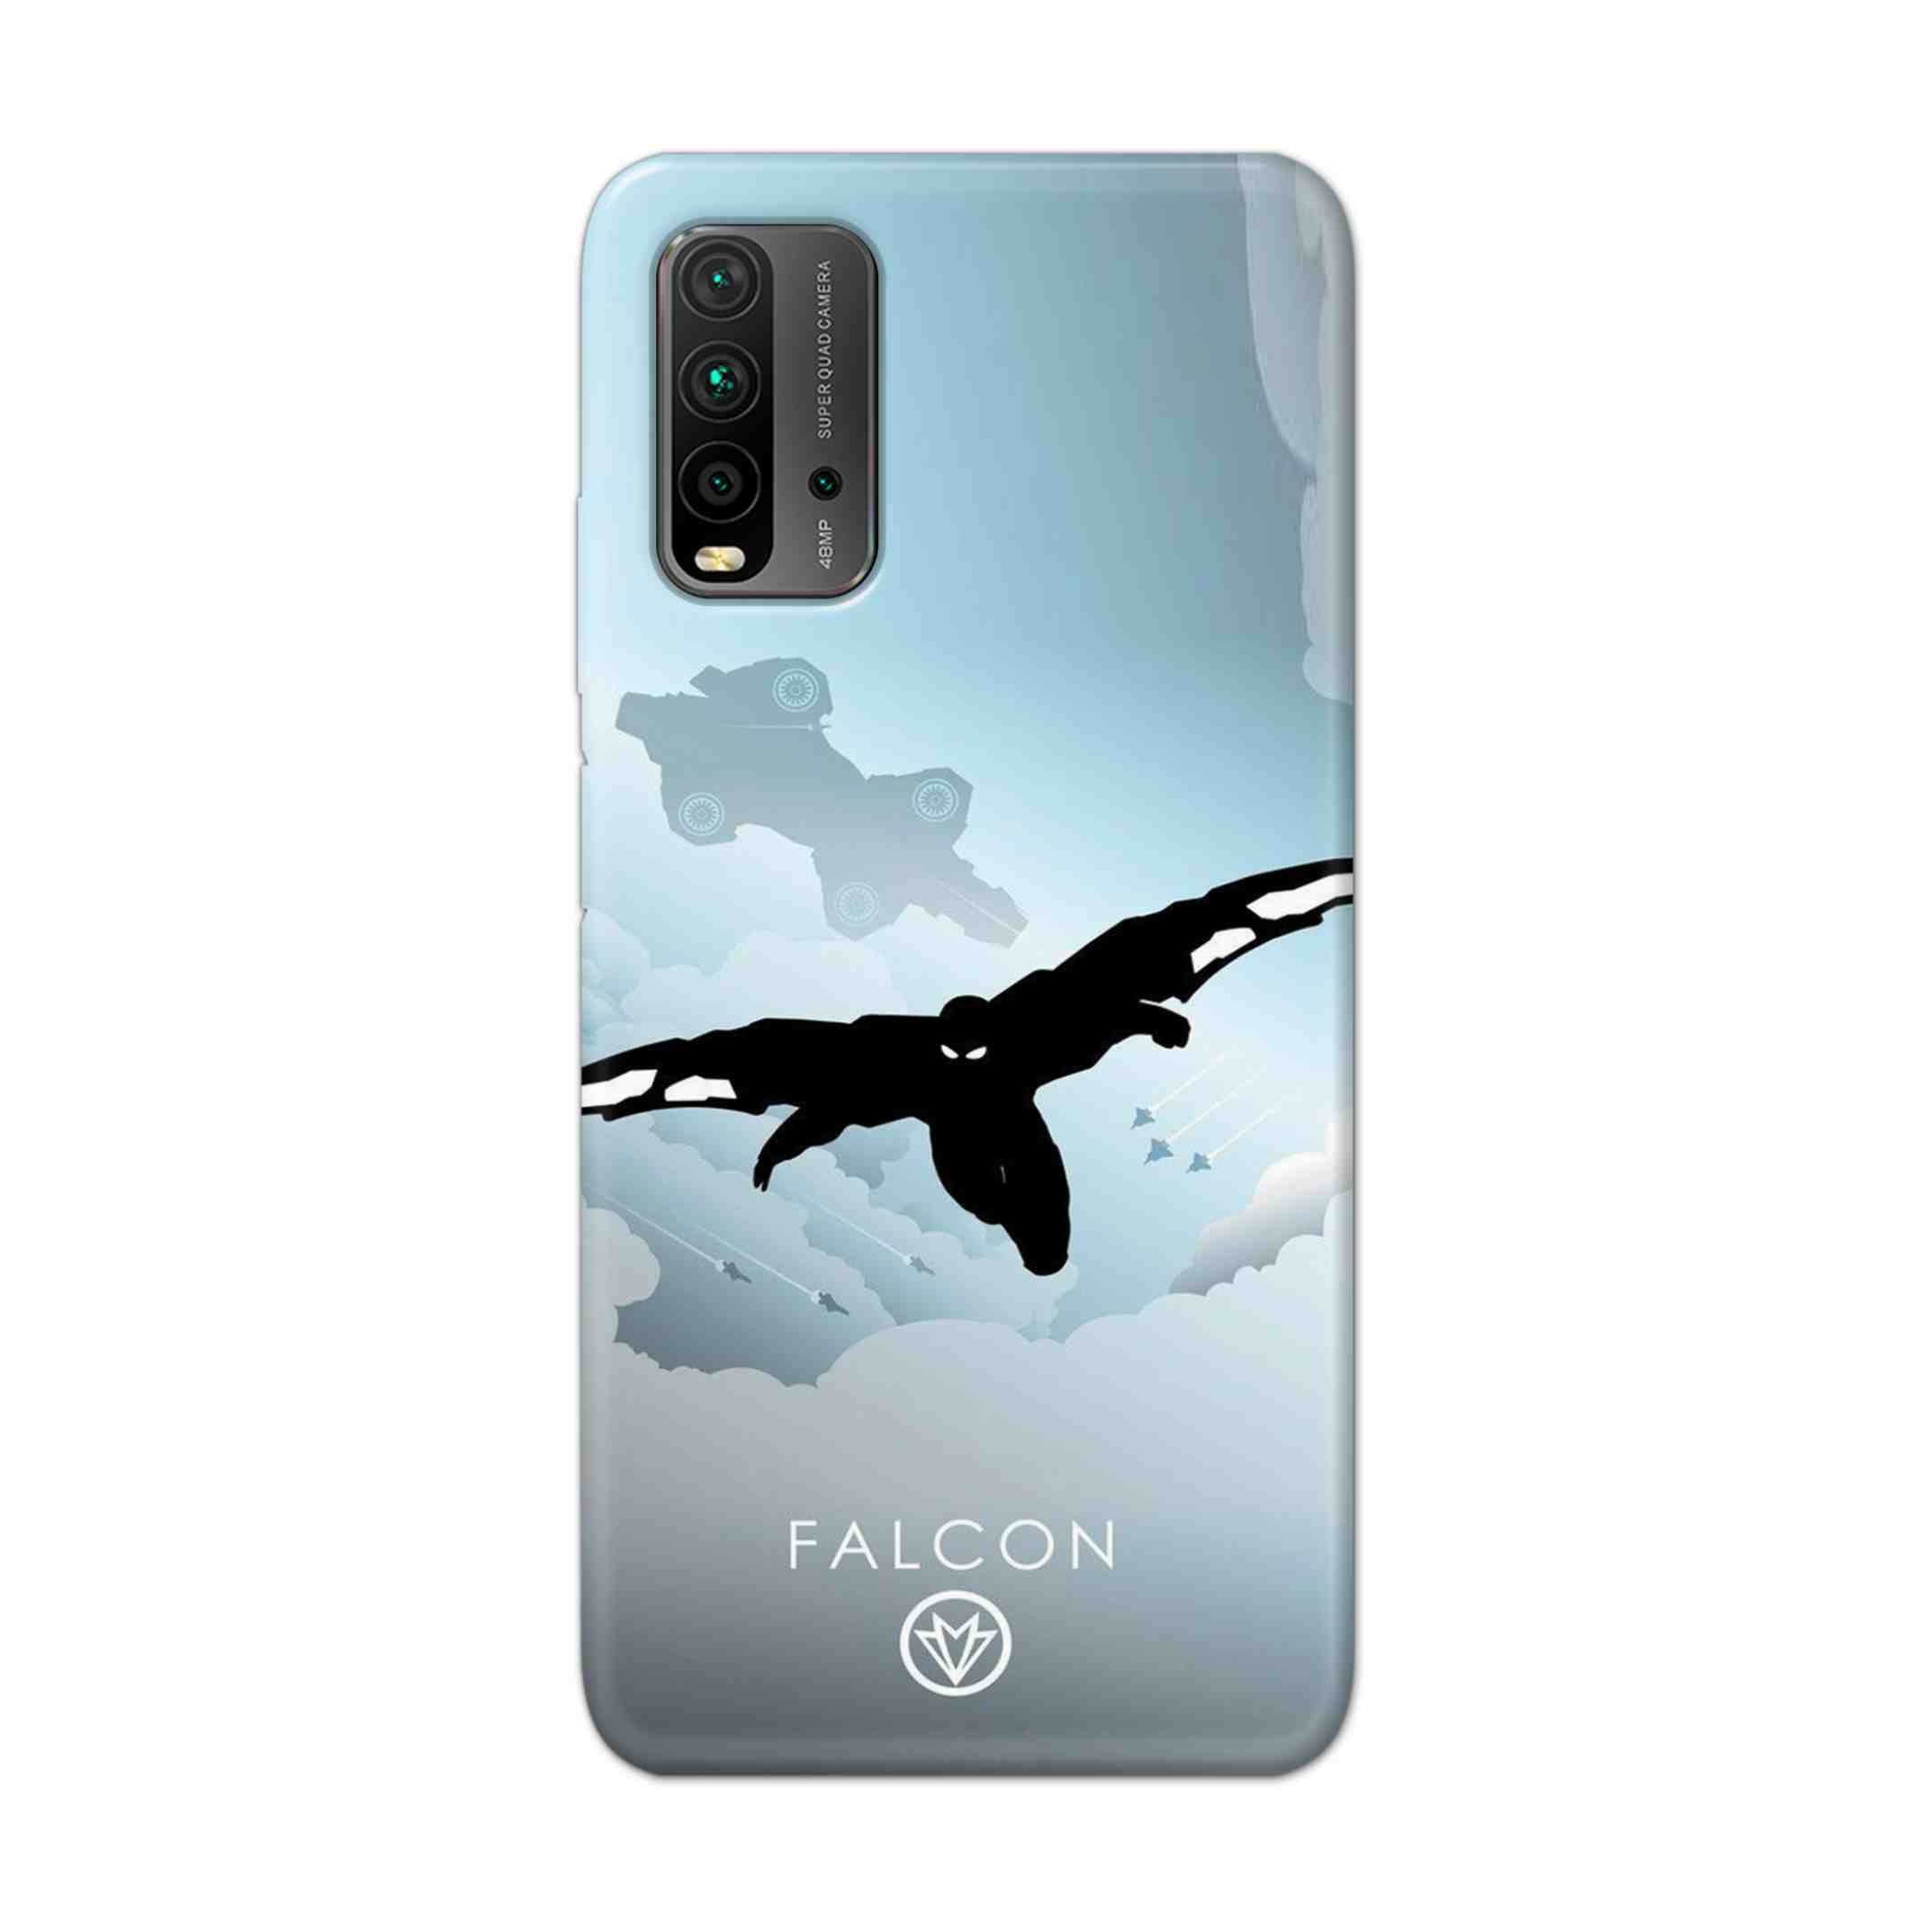 Buy Falcon Hard Back Mobile Phone Case Cover For Redmi 9 Power Online